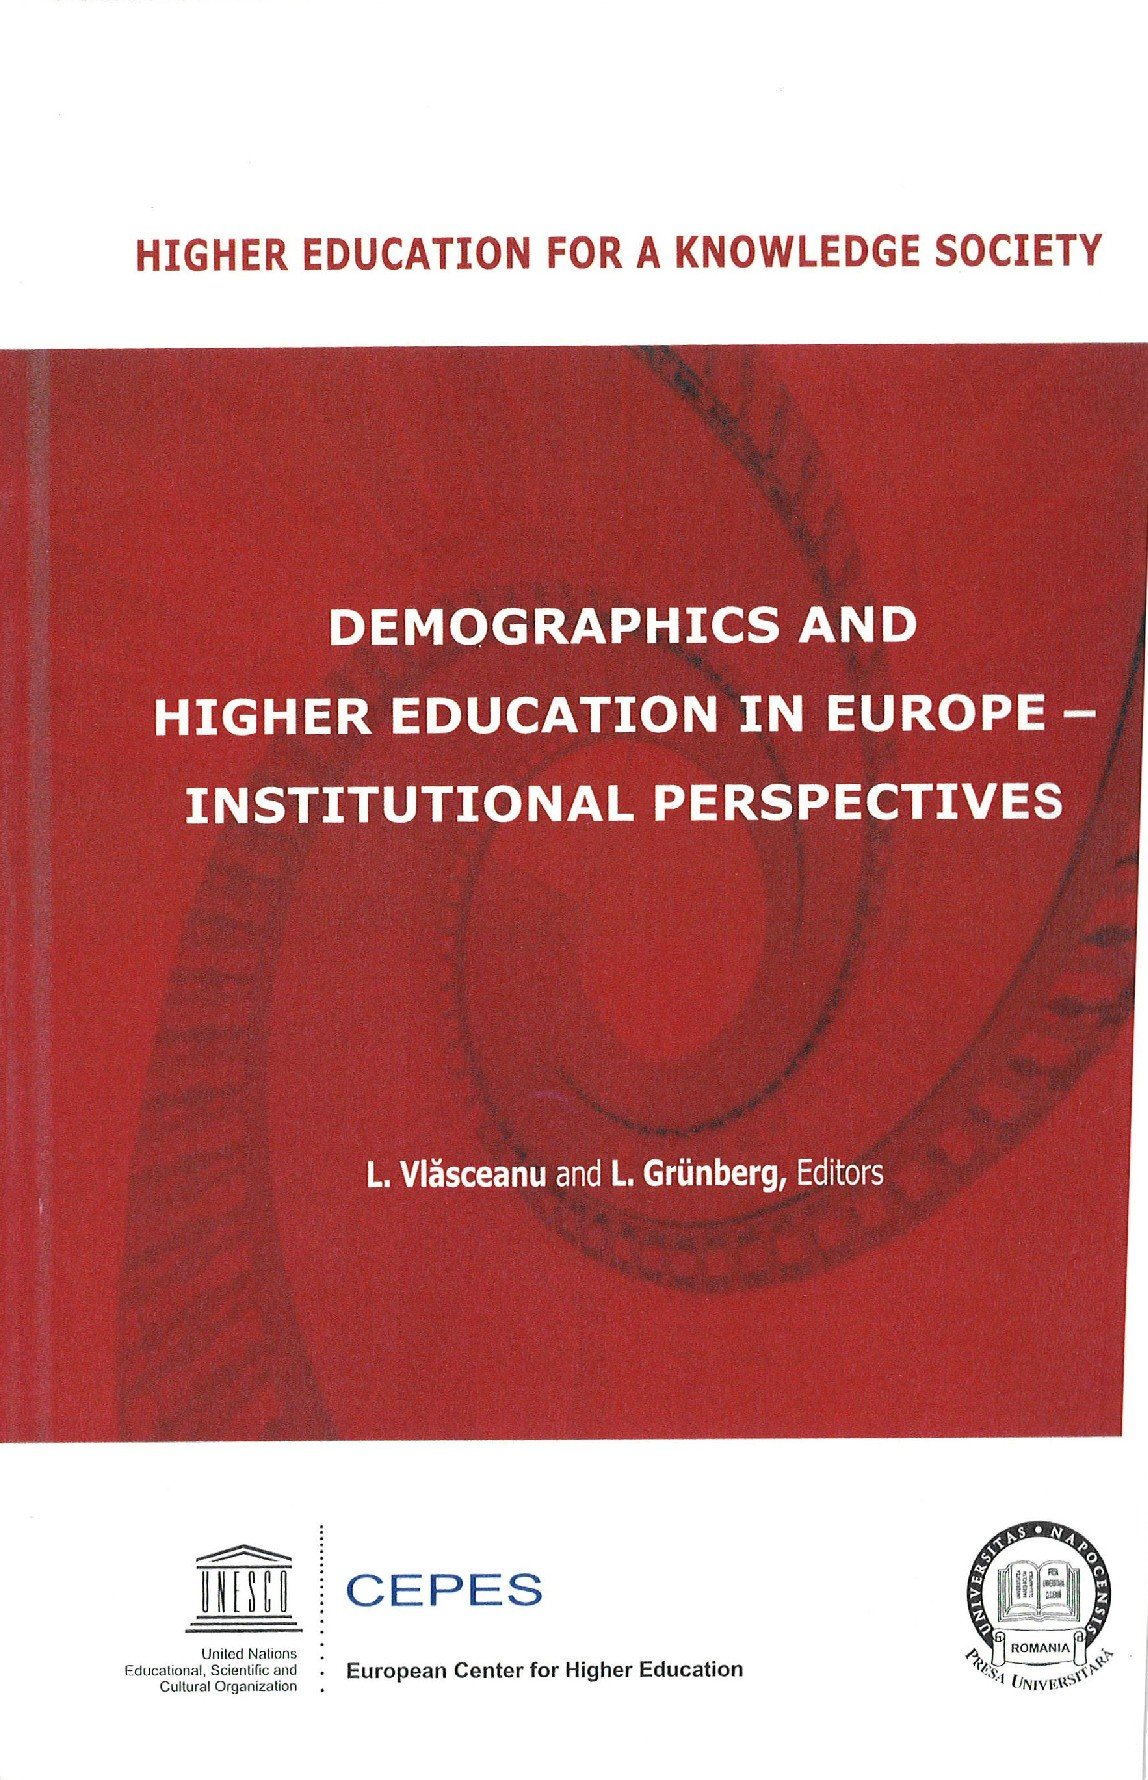 Demographics and Higher Education in Europe - Institutional Perspectives